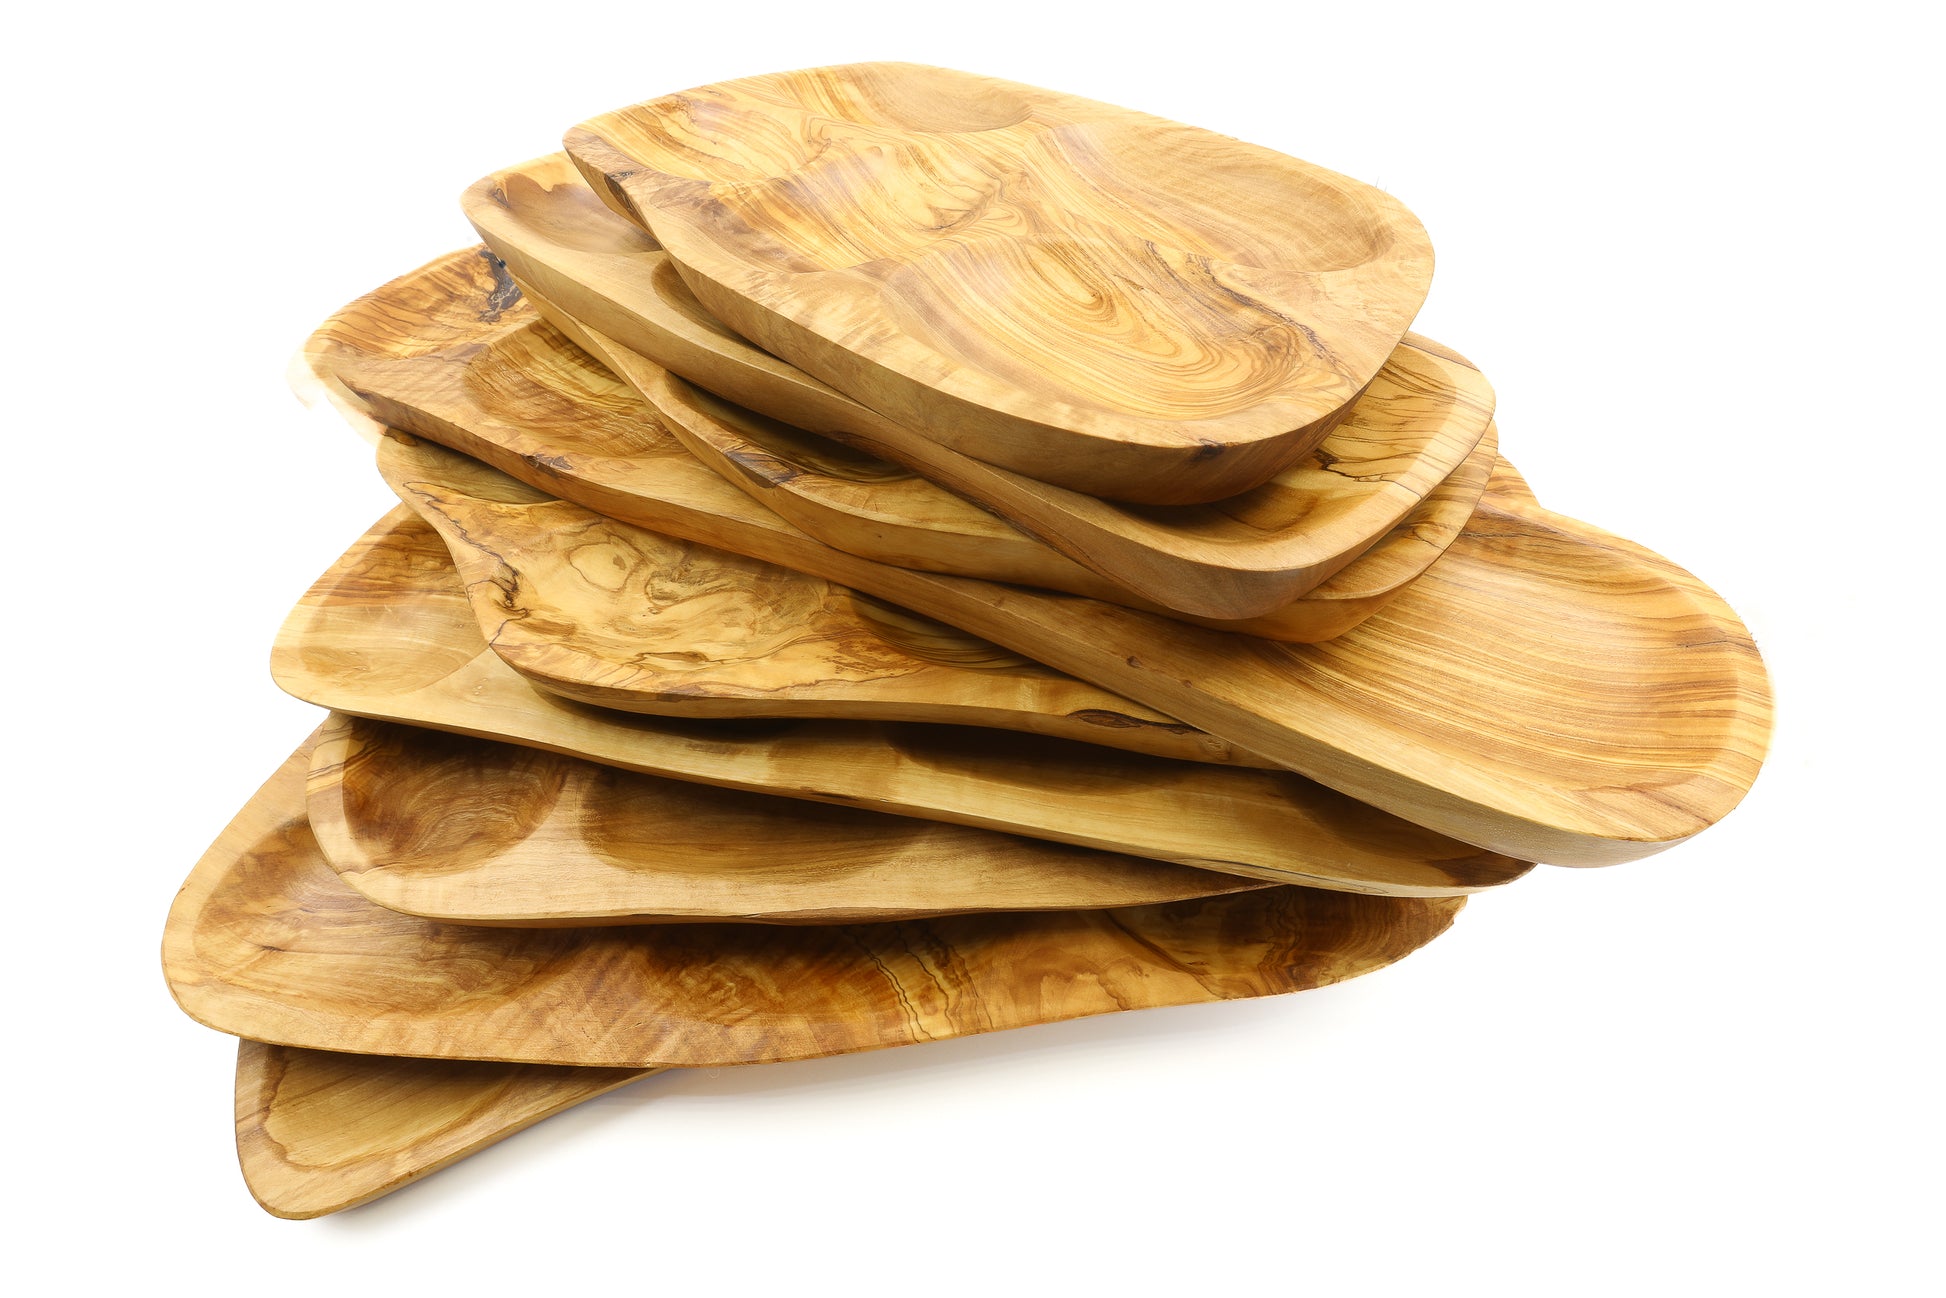 Irregular-shaped olive wood serving tray with multiple sections